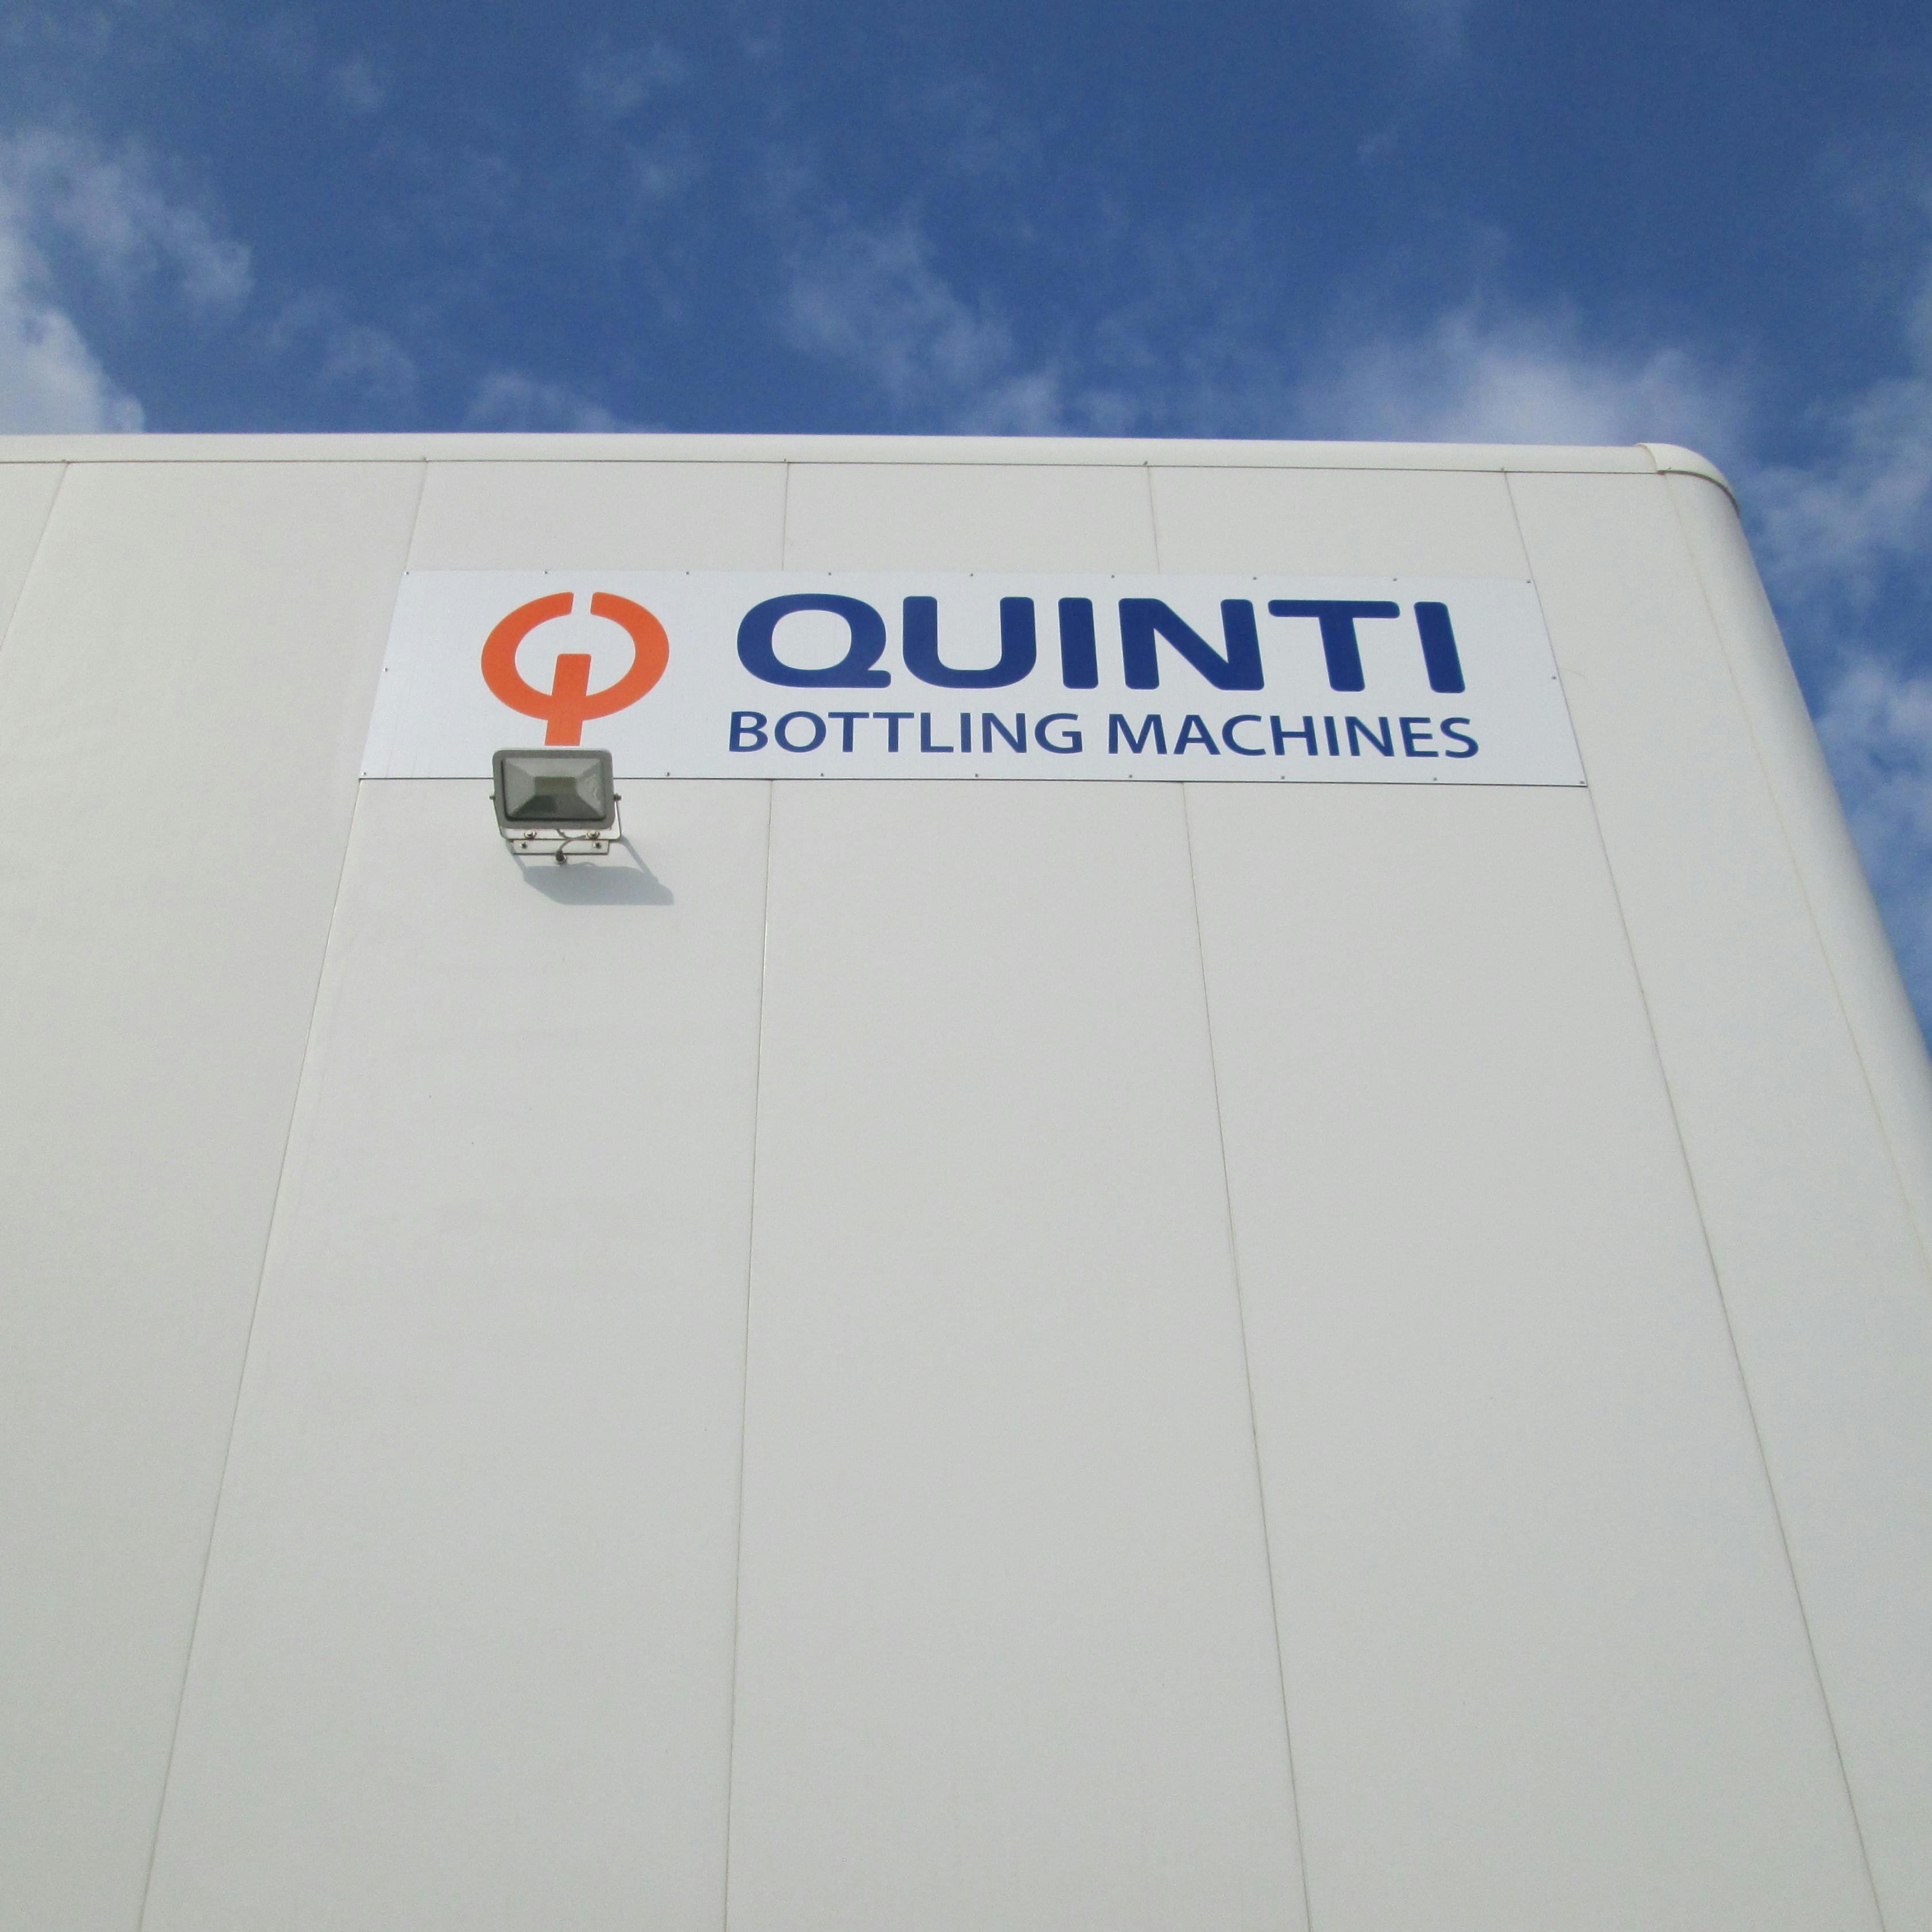 Quinti Bottling Machines sign whit blue writing and orange logo, placed on the company's headquarter. Photo taken from the bottom up. In the background blue sky with some white clouds.